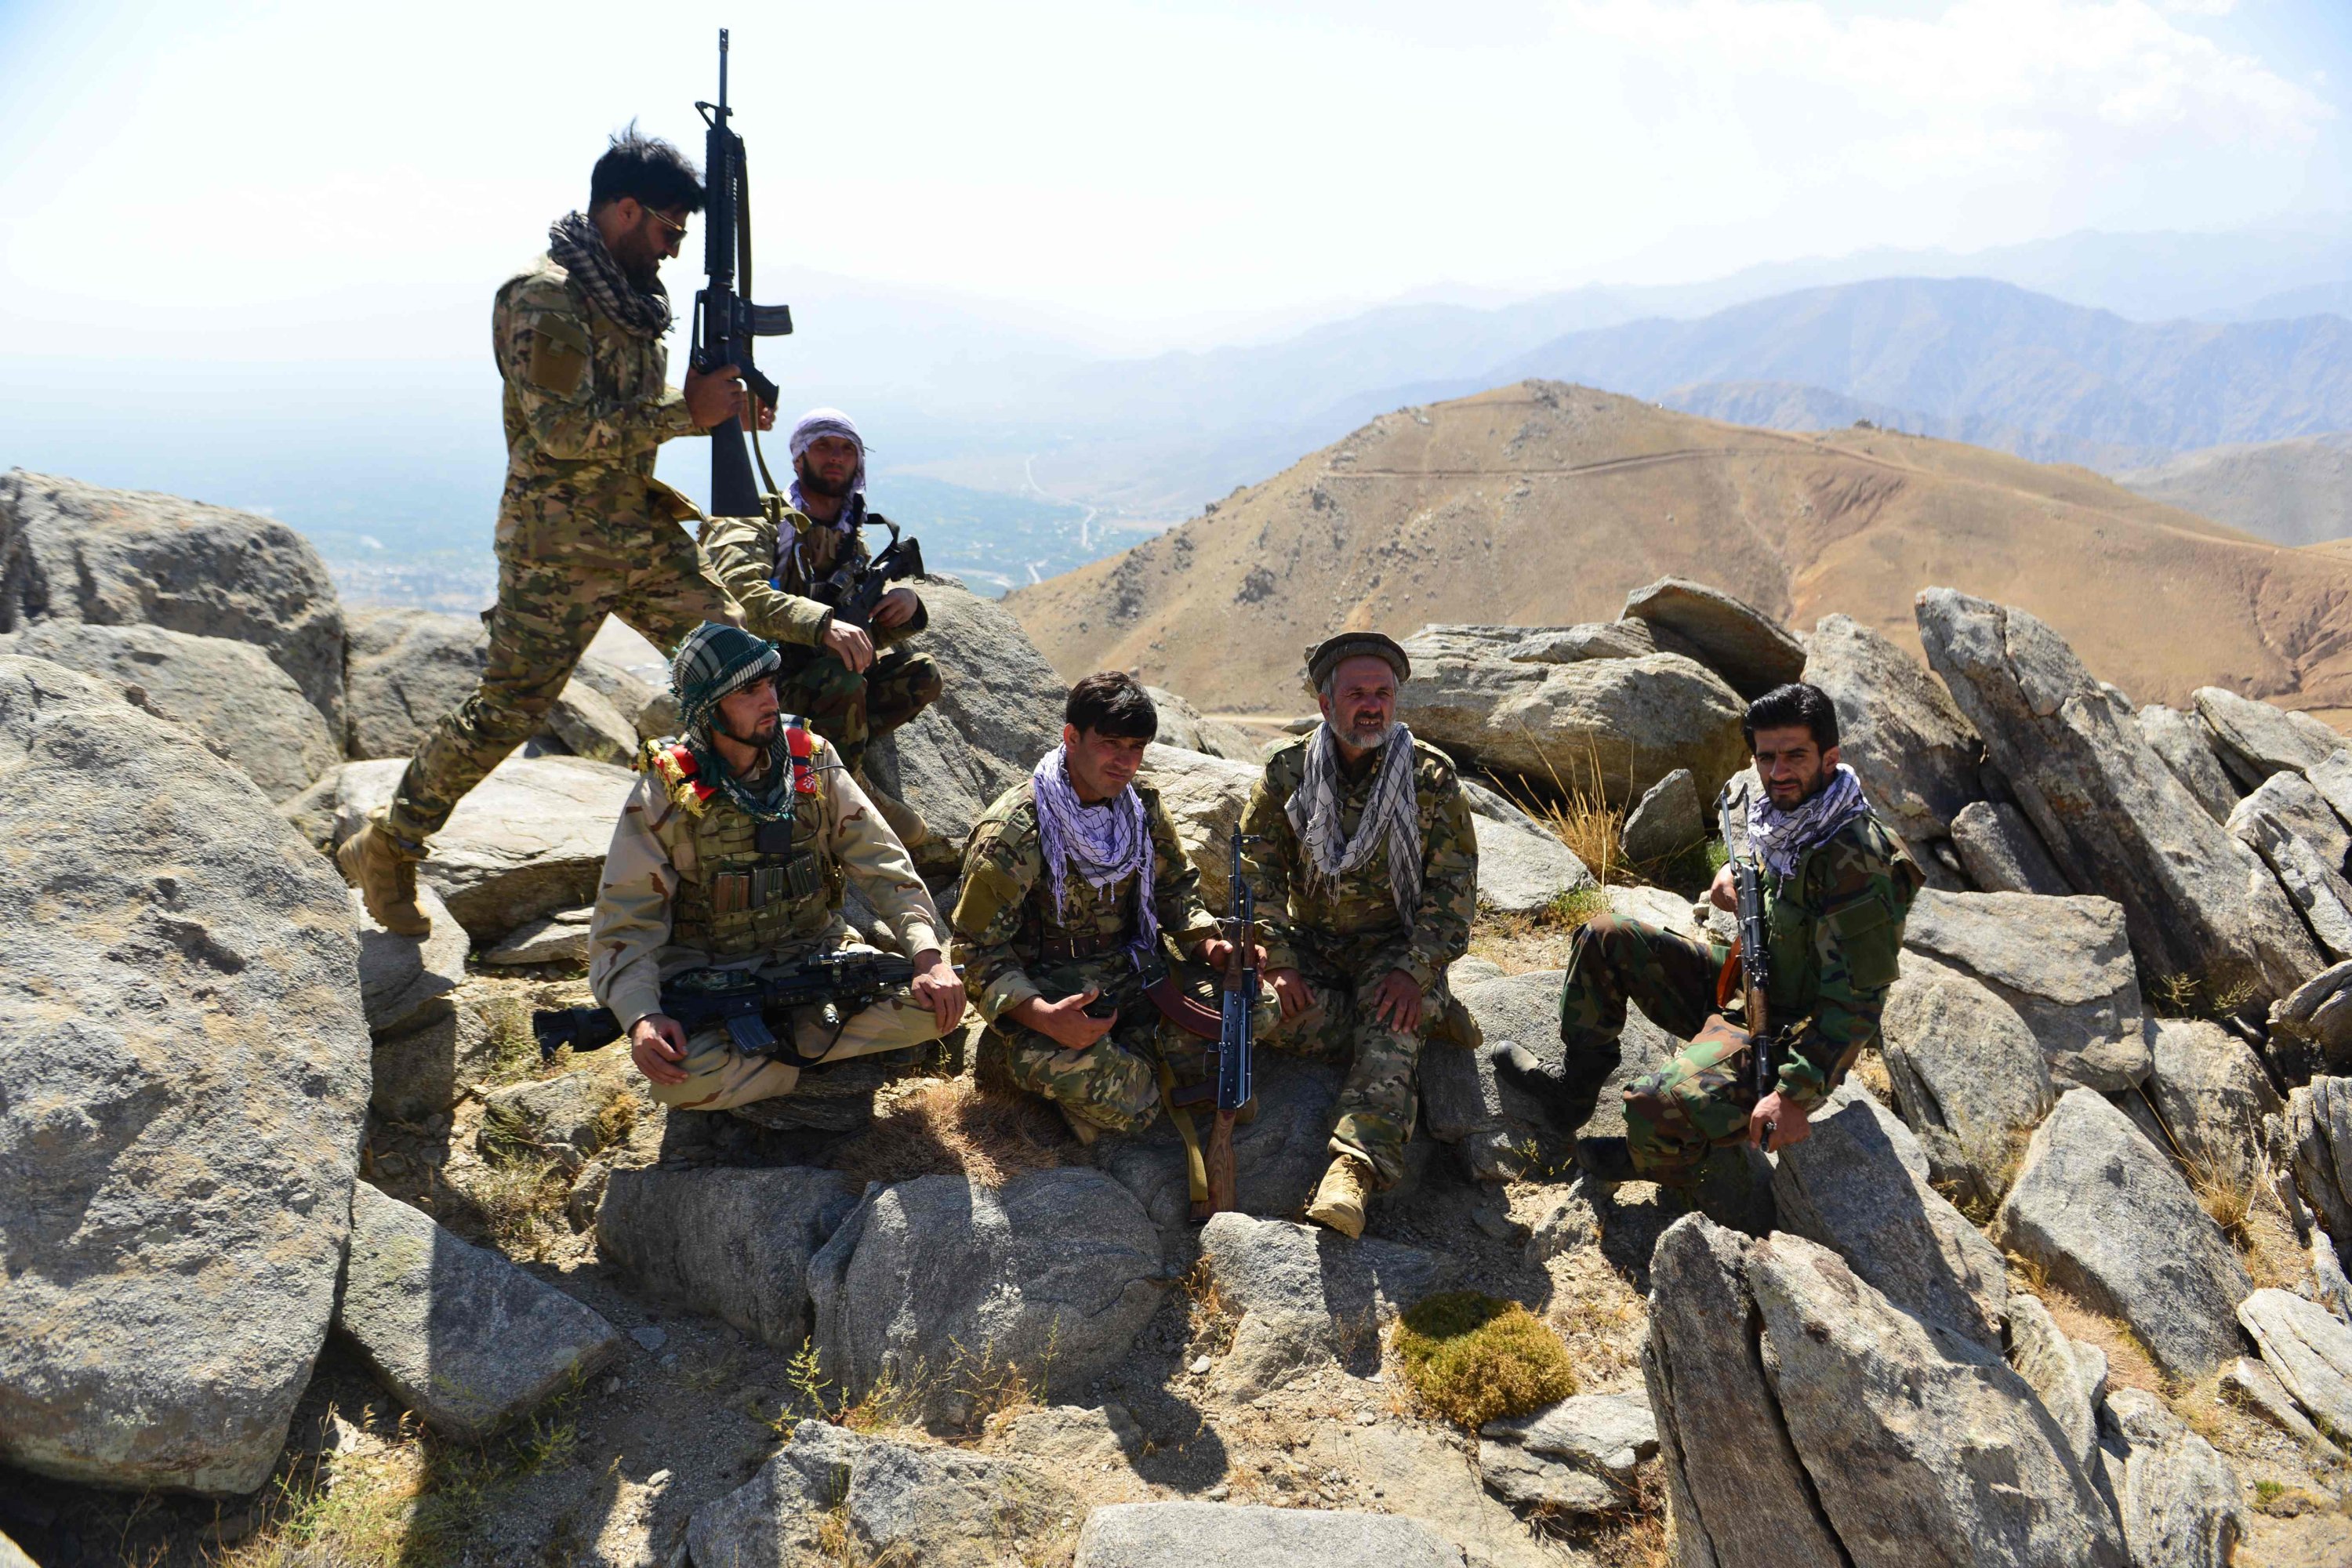 Afghan resistance movement and anti-Taliban uprising forces take rest as they patrol on a hilltop in Darband area in Anaba district, Panjshir province, Afghanistan, Sept. 1, 2021. (AFP Photo)